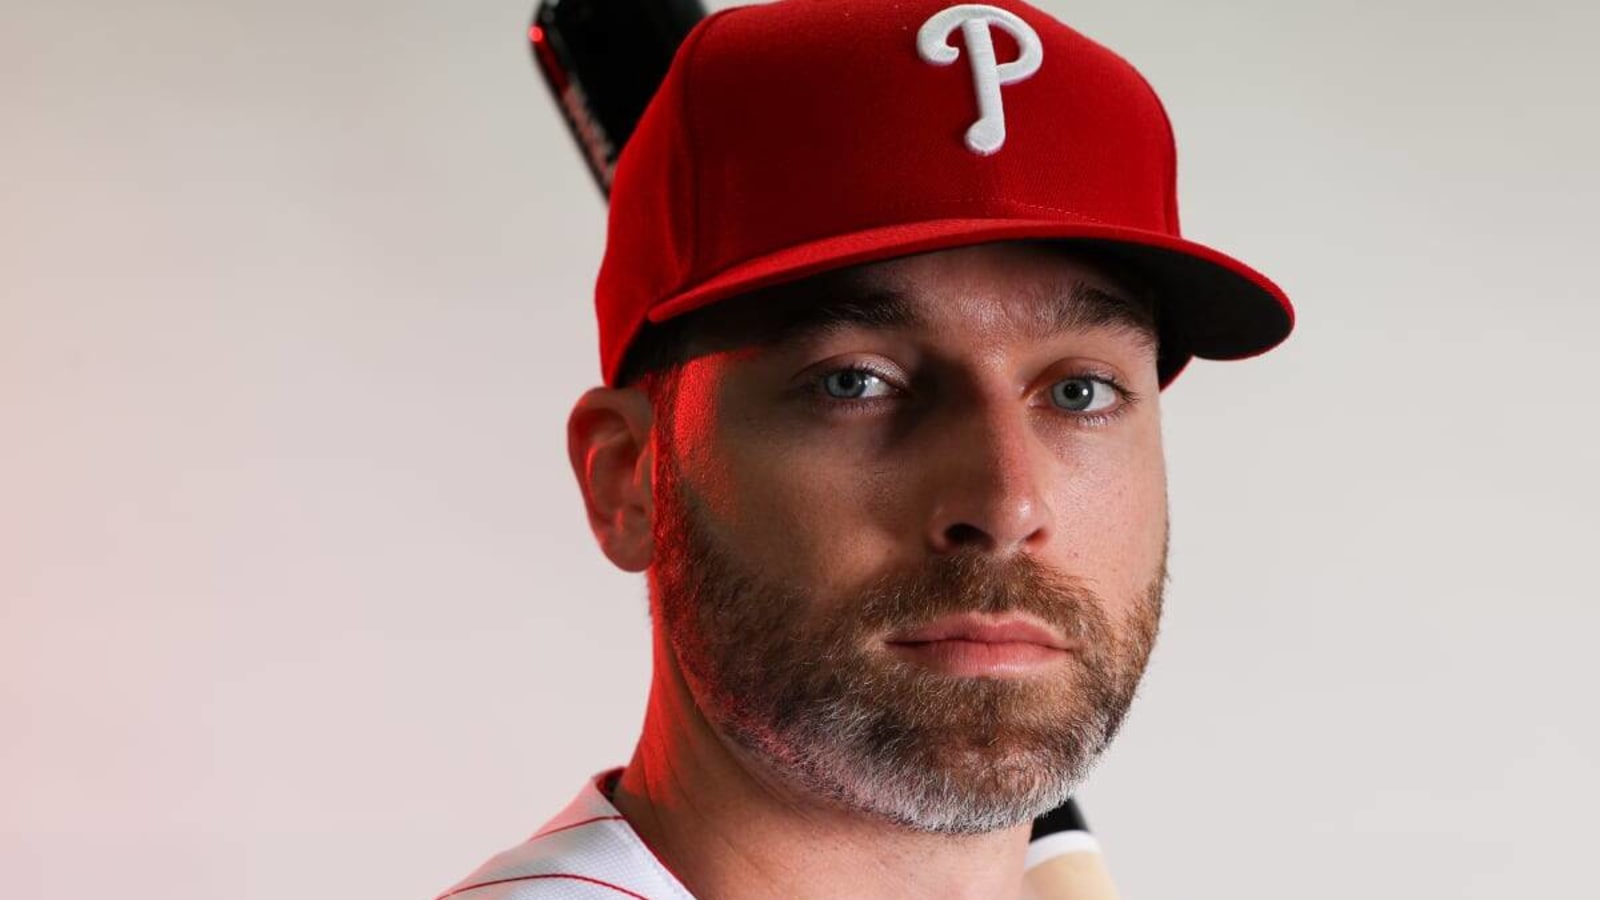 Cave Vying For One Of Final Spots On Phillies Roster